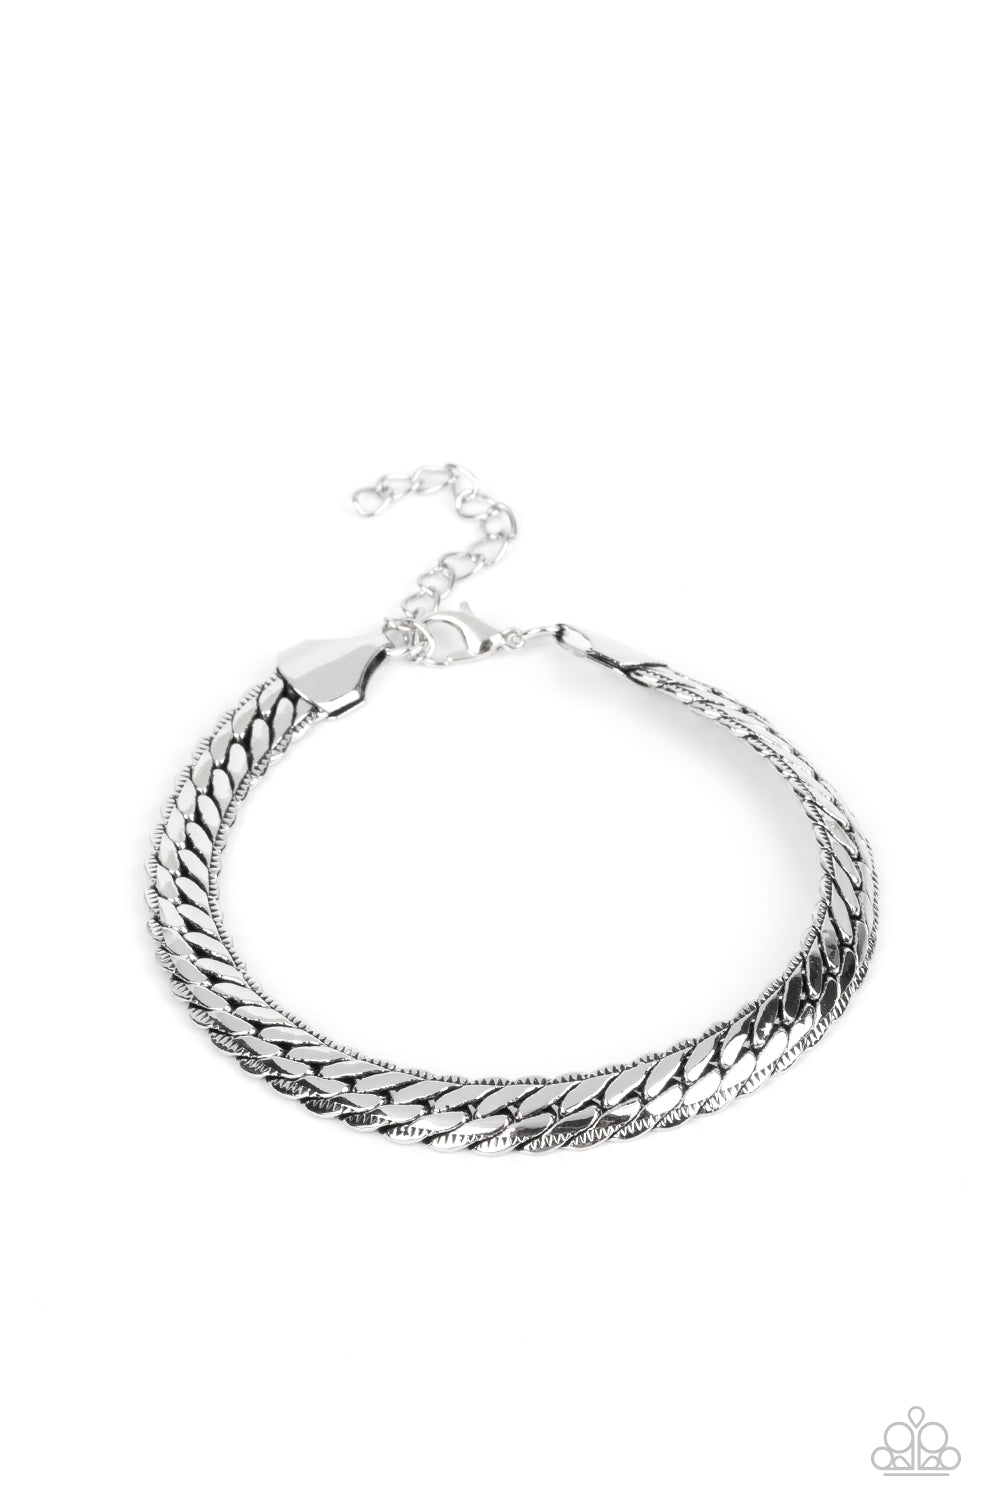 Paparazzi Accessories: Cargo Couture - Silver Bracelet – Jewels N